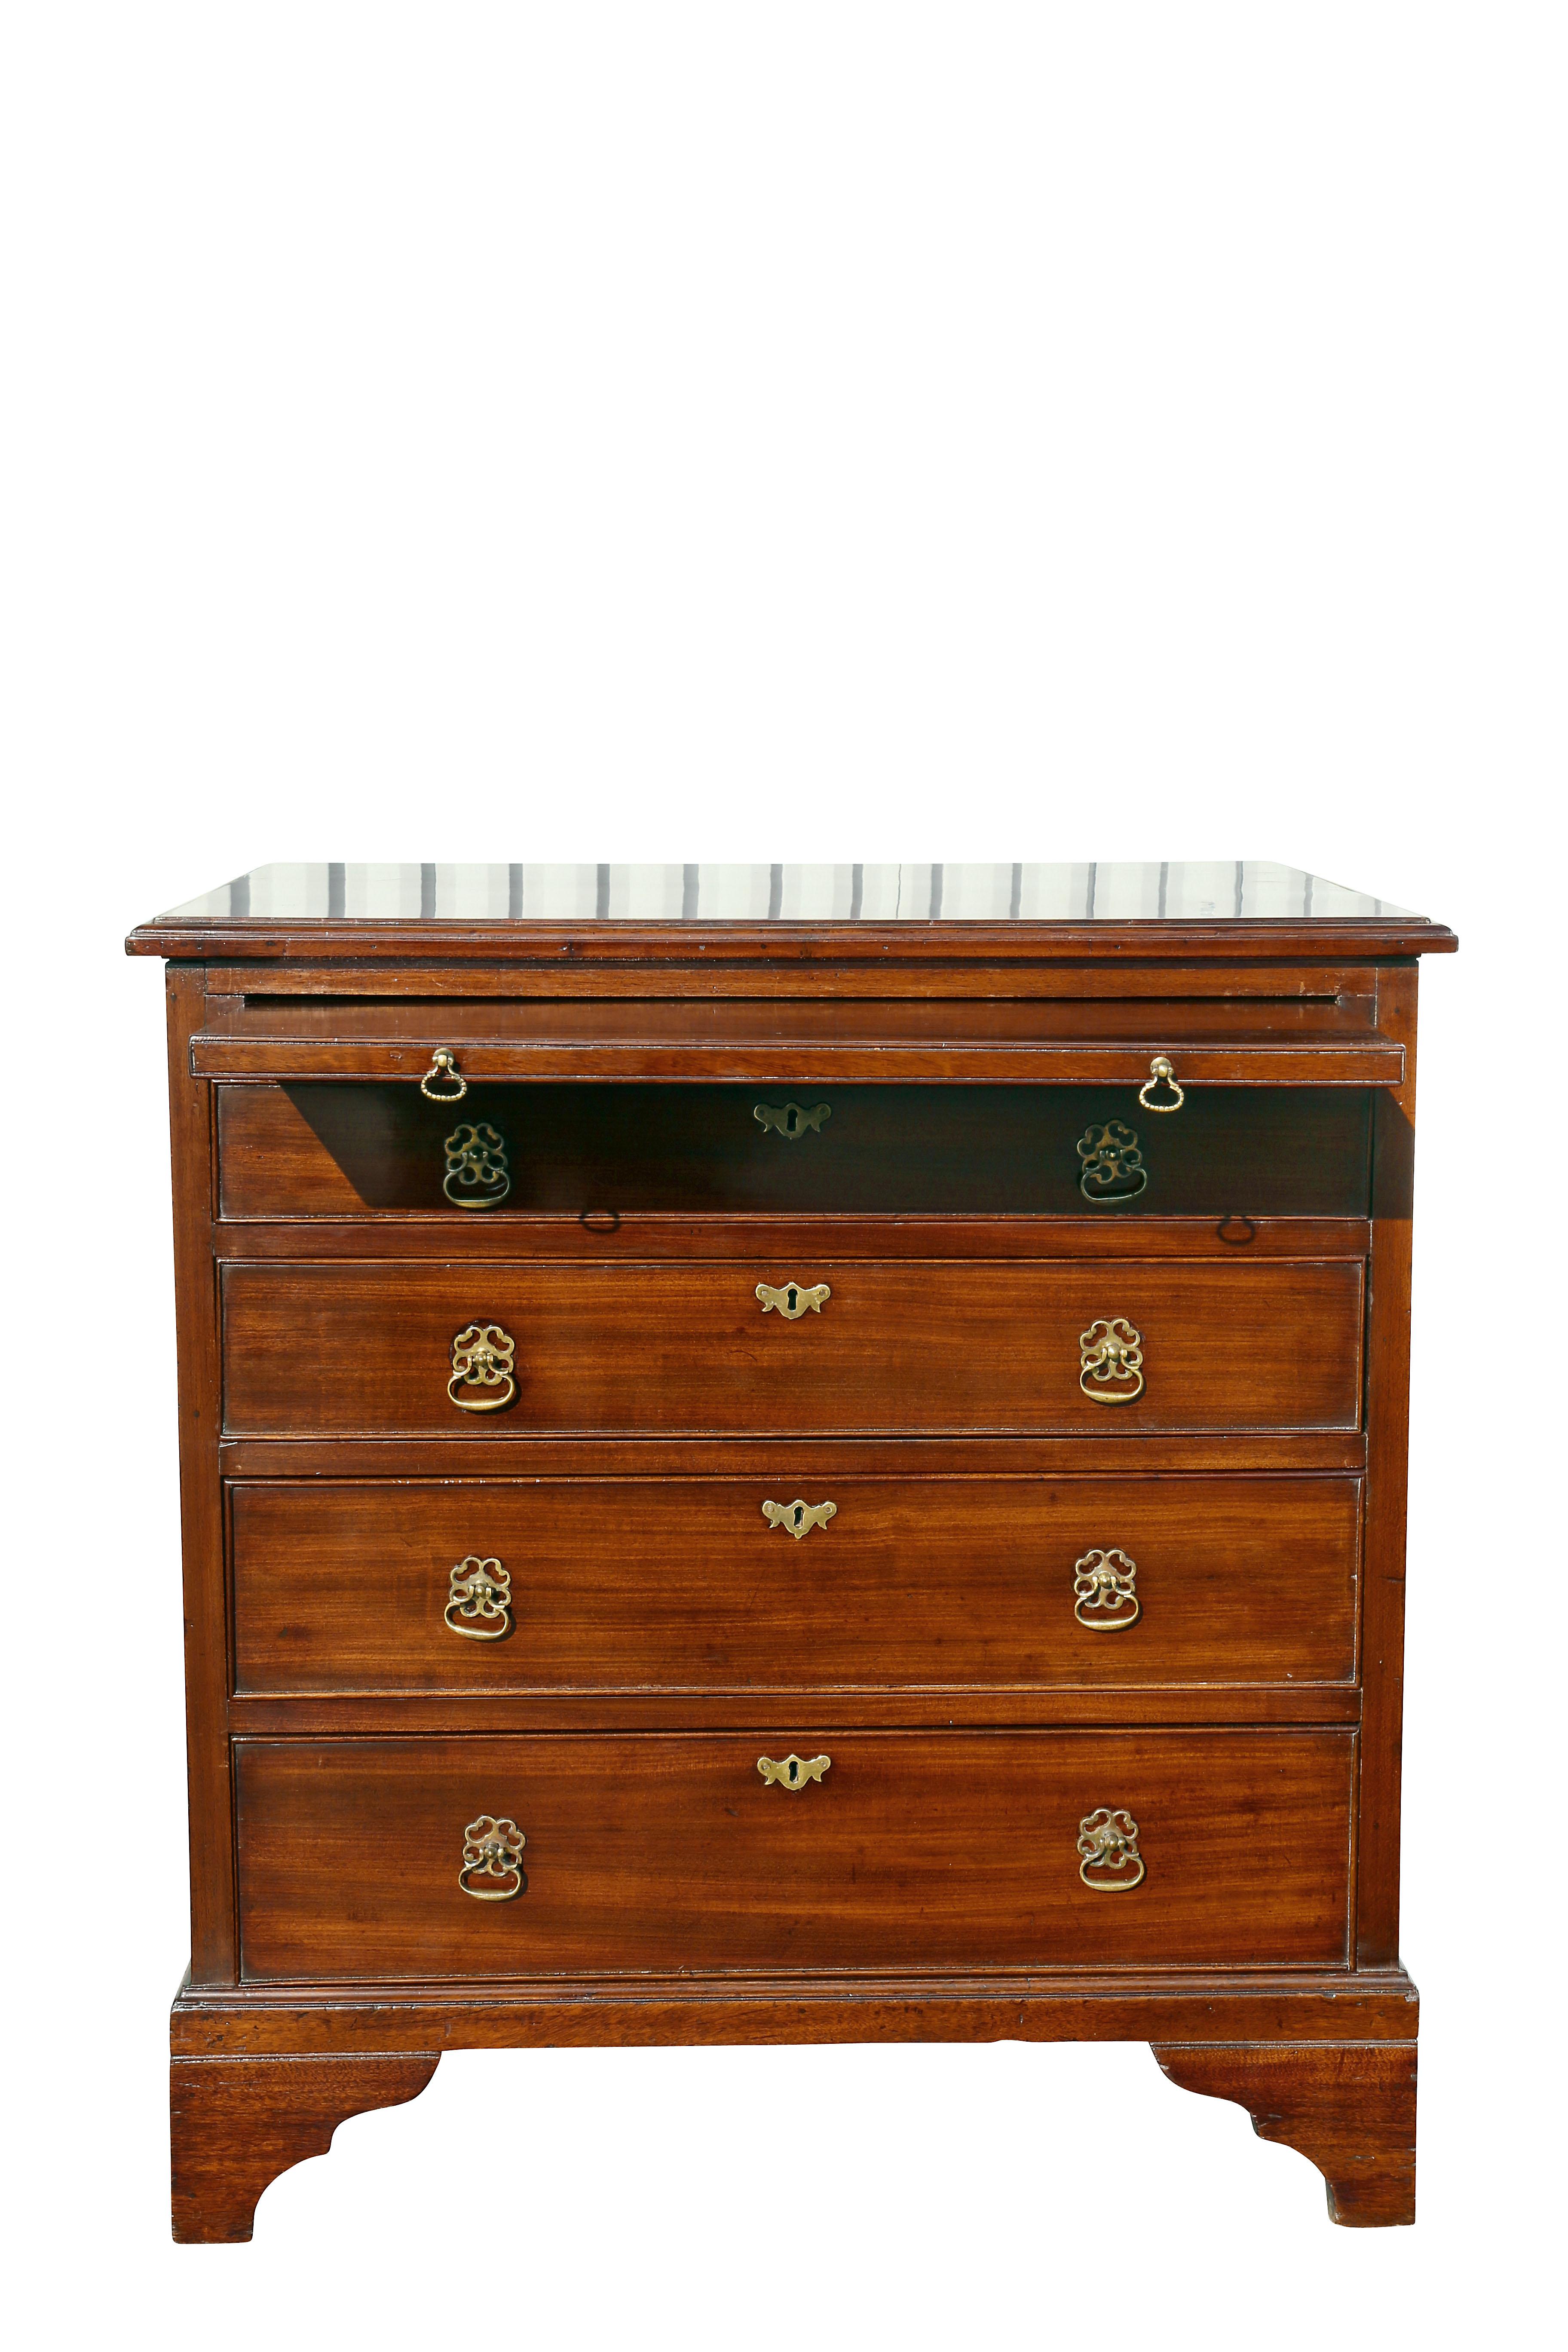 Rectangular top over a brushing slide and four graduated drawers, bracket feet.